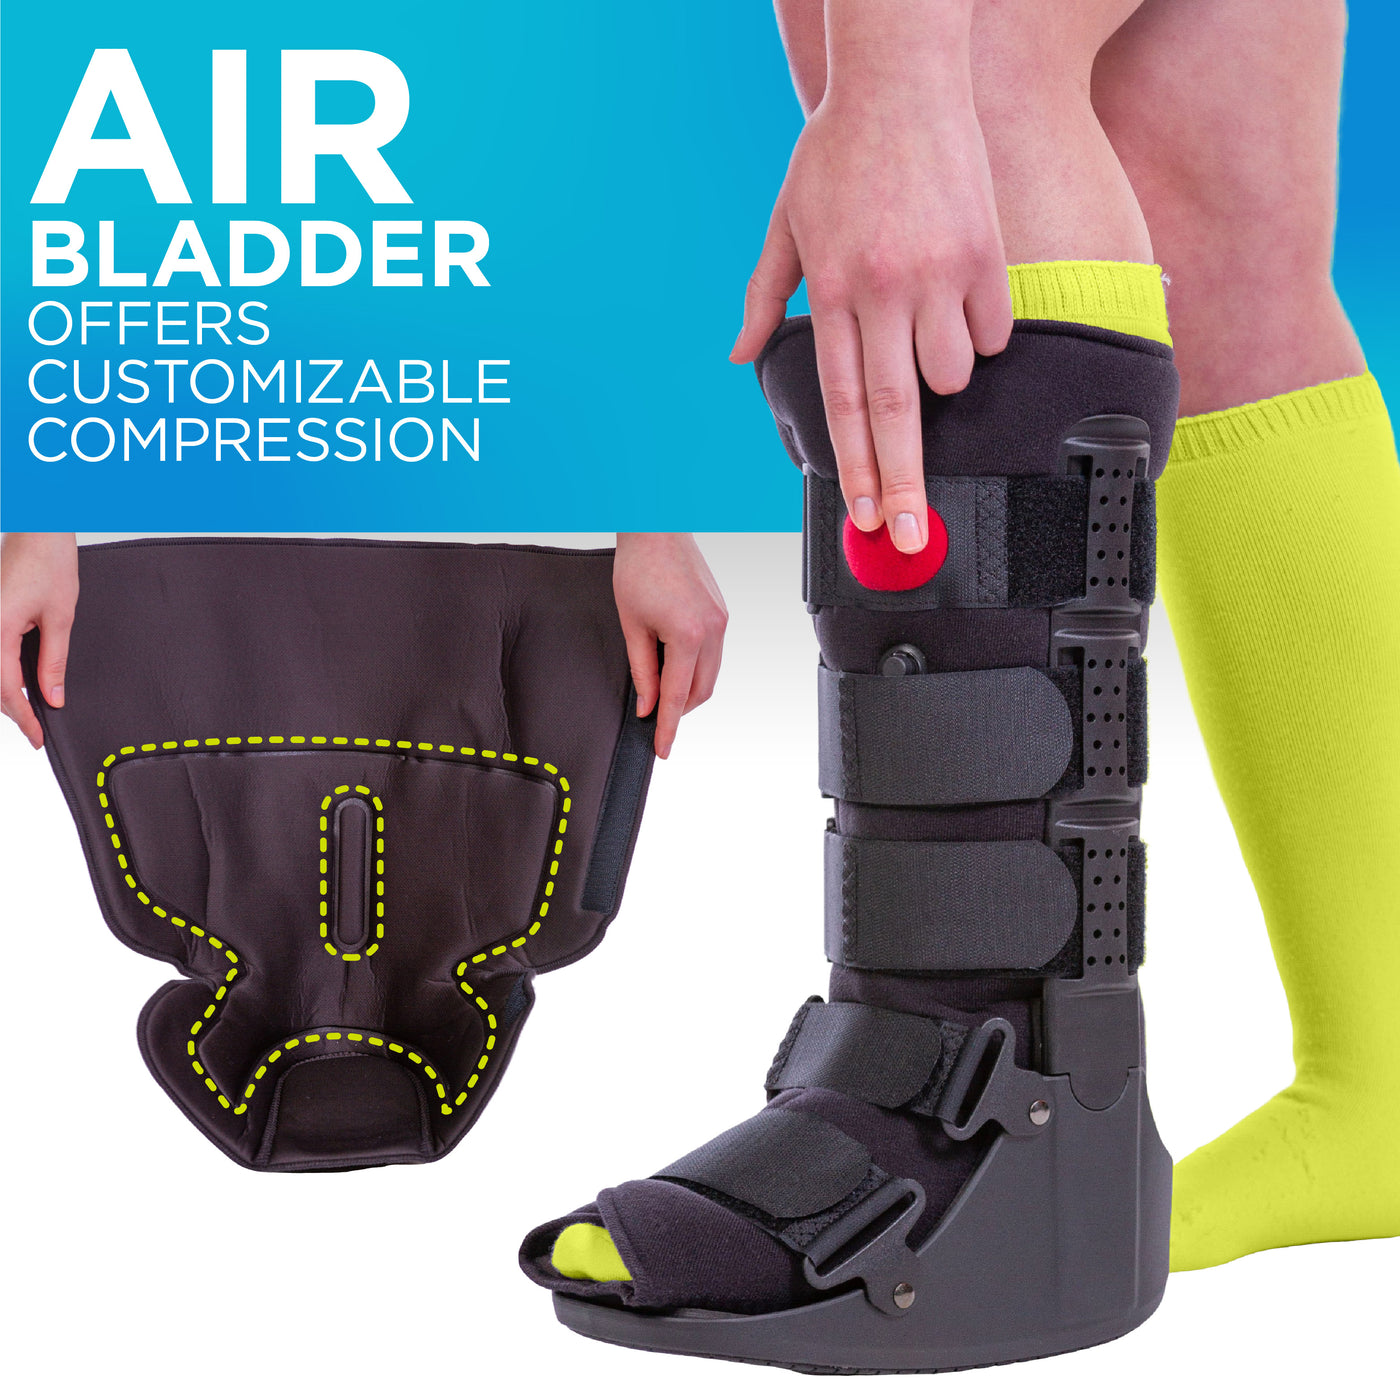 Air bladder on the broken ankle boot applies custom compression to your foot